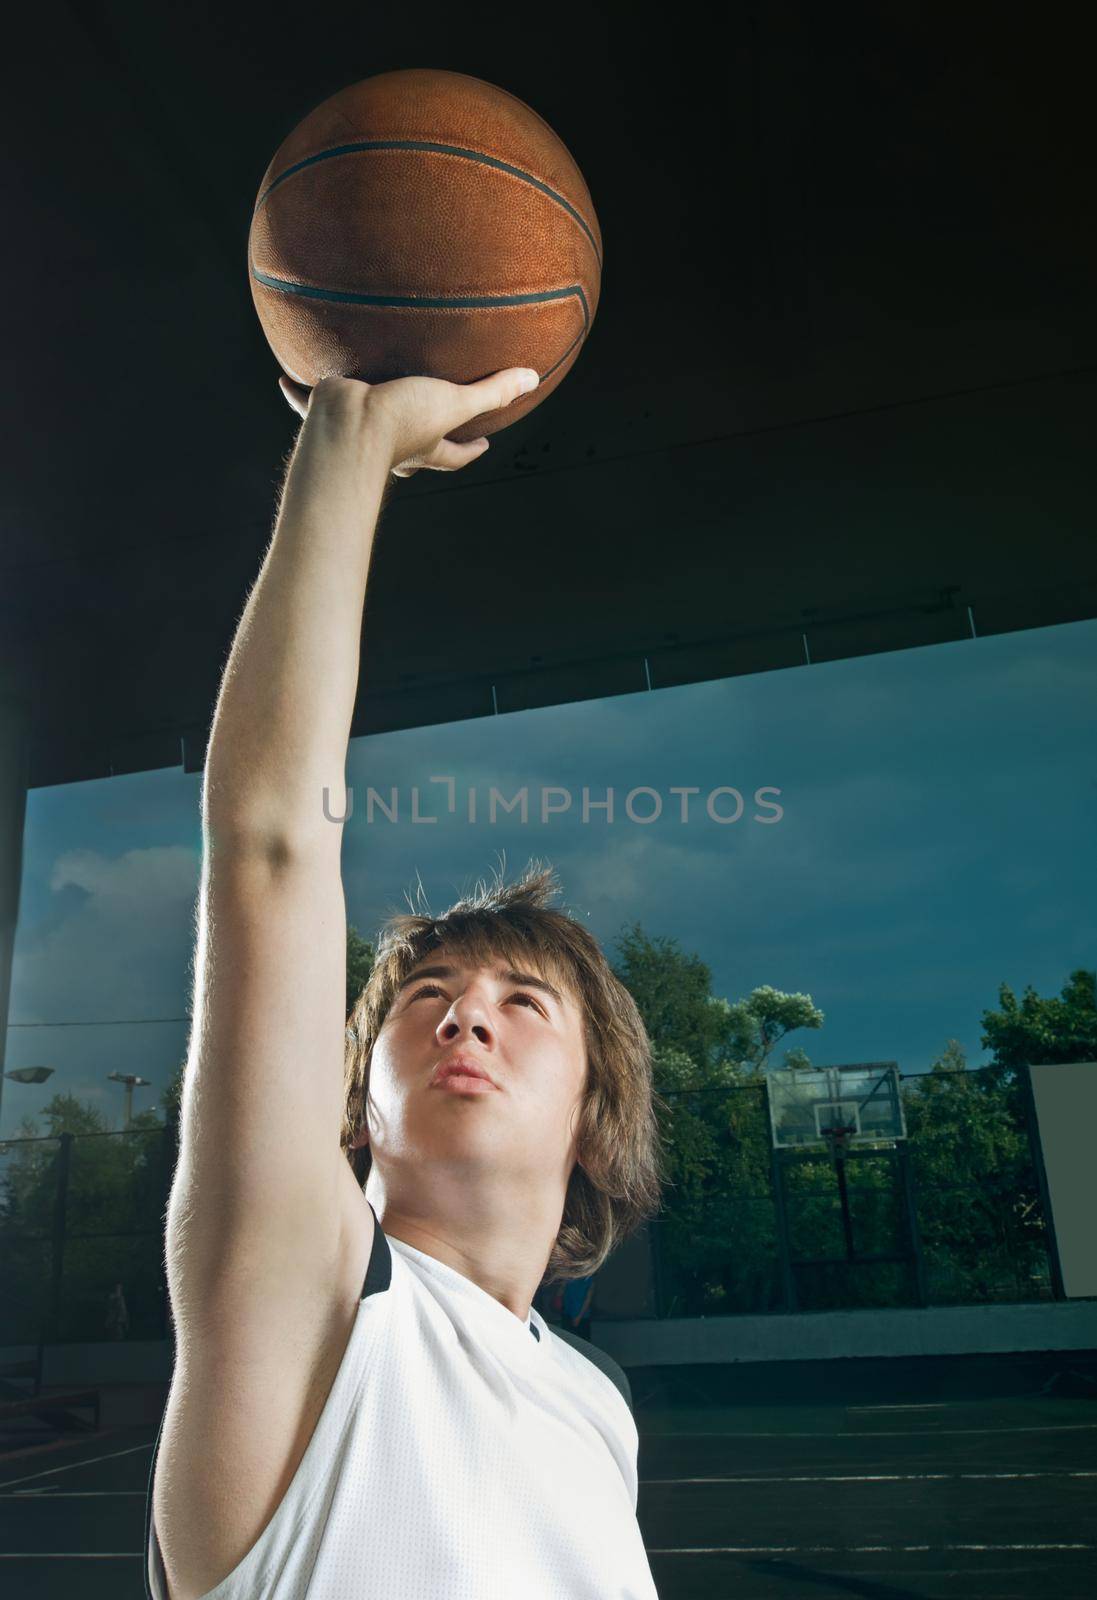 Teenage basketball player shooting the ball with outstretched hand